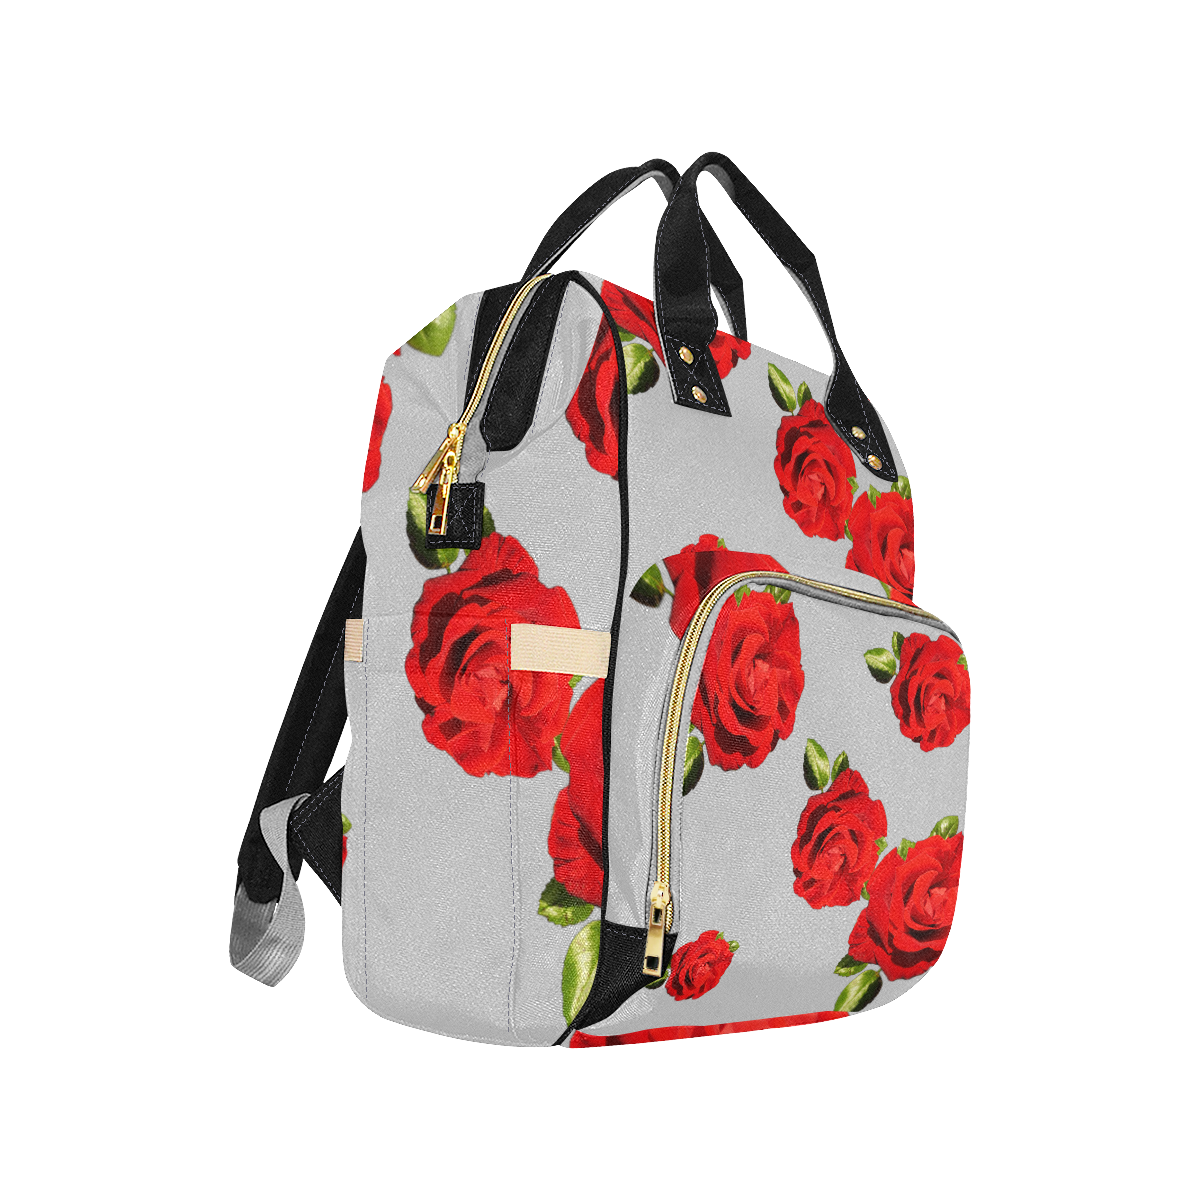 Fairlings Delight's Floral Luxury Collection- Red Rose Multi-Function Diaper Backpack 53086c2 Multi-Function Diaper Backpack/Diaper Bag (Model 1688)